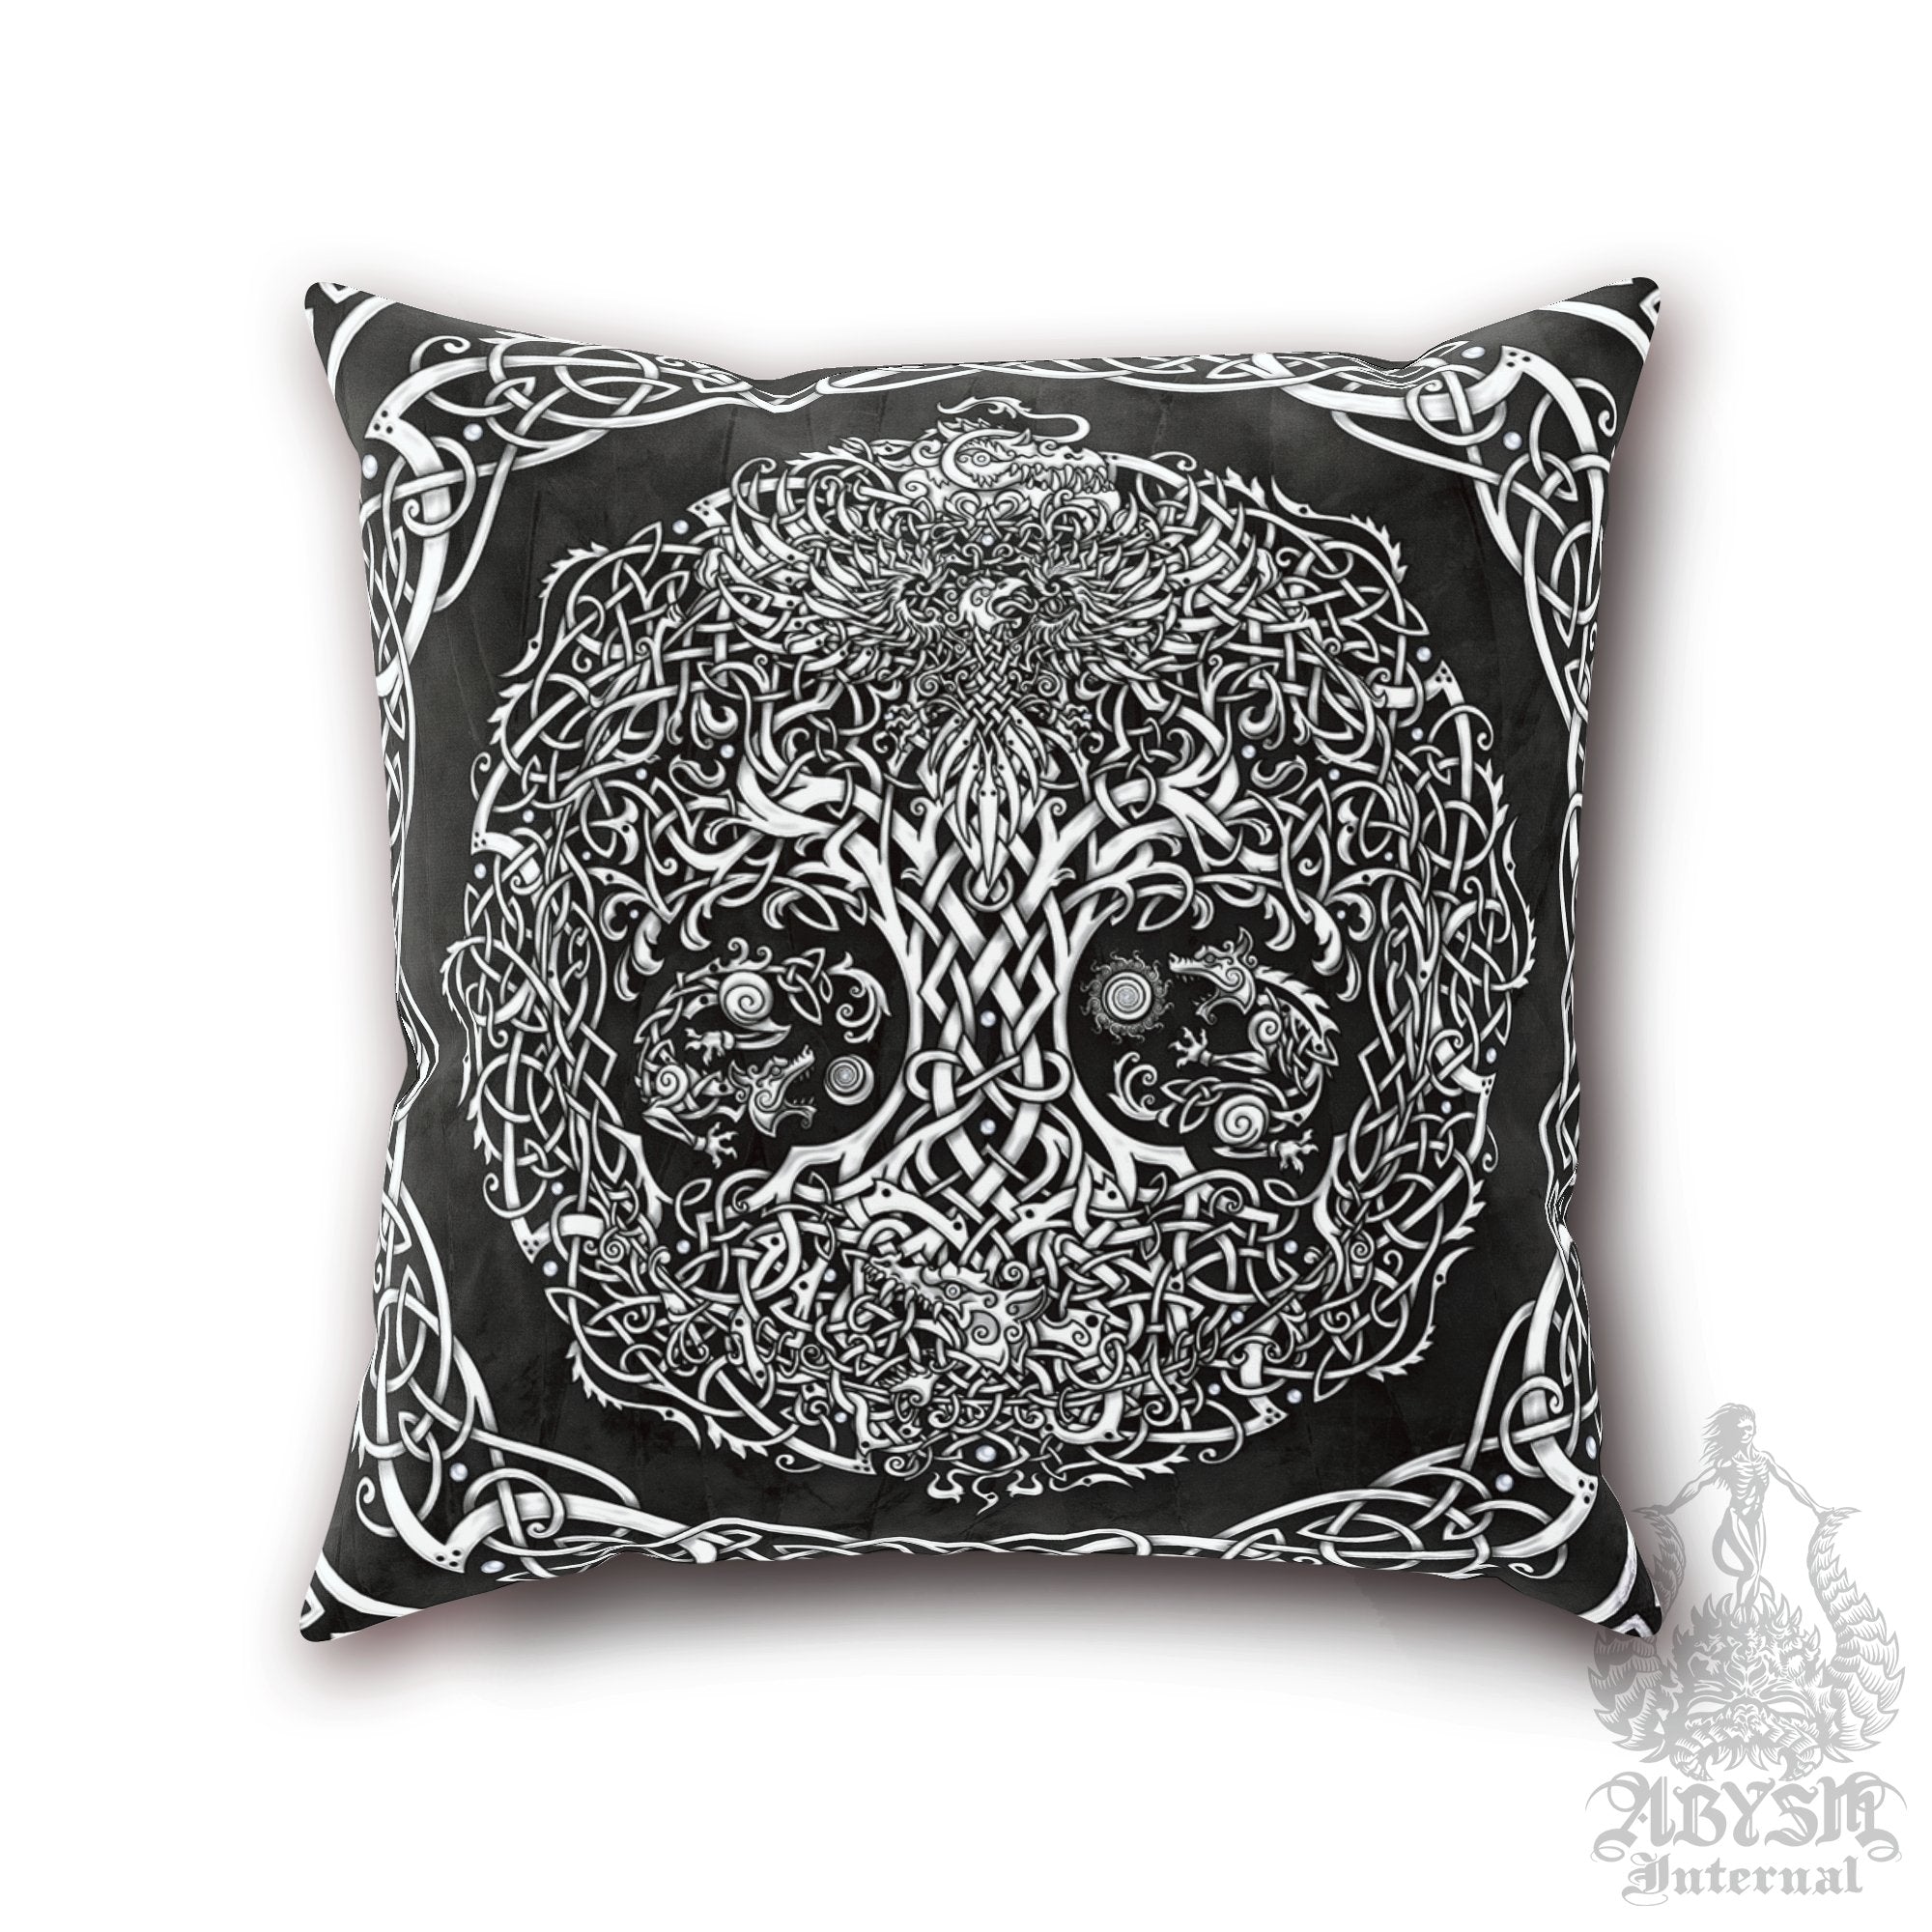 Viking Throw Pillow, Decorative Accent Pillow, Square Cushion Cover, Yggdrasil, Norse Decor, Nordic Art, Alternative Home - Tree of Life, White & 3 Colors - Abysm Internal